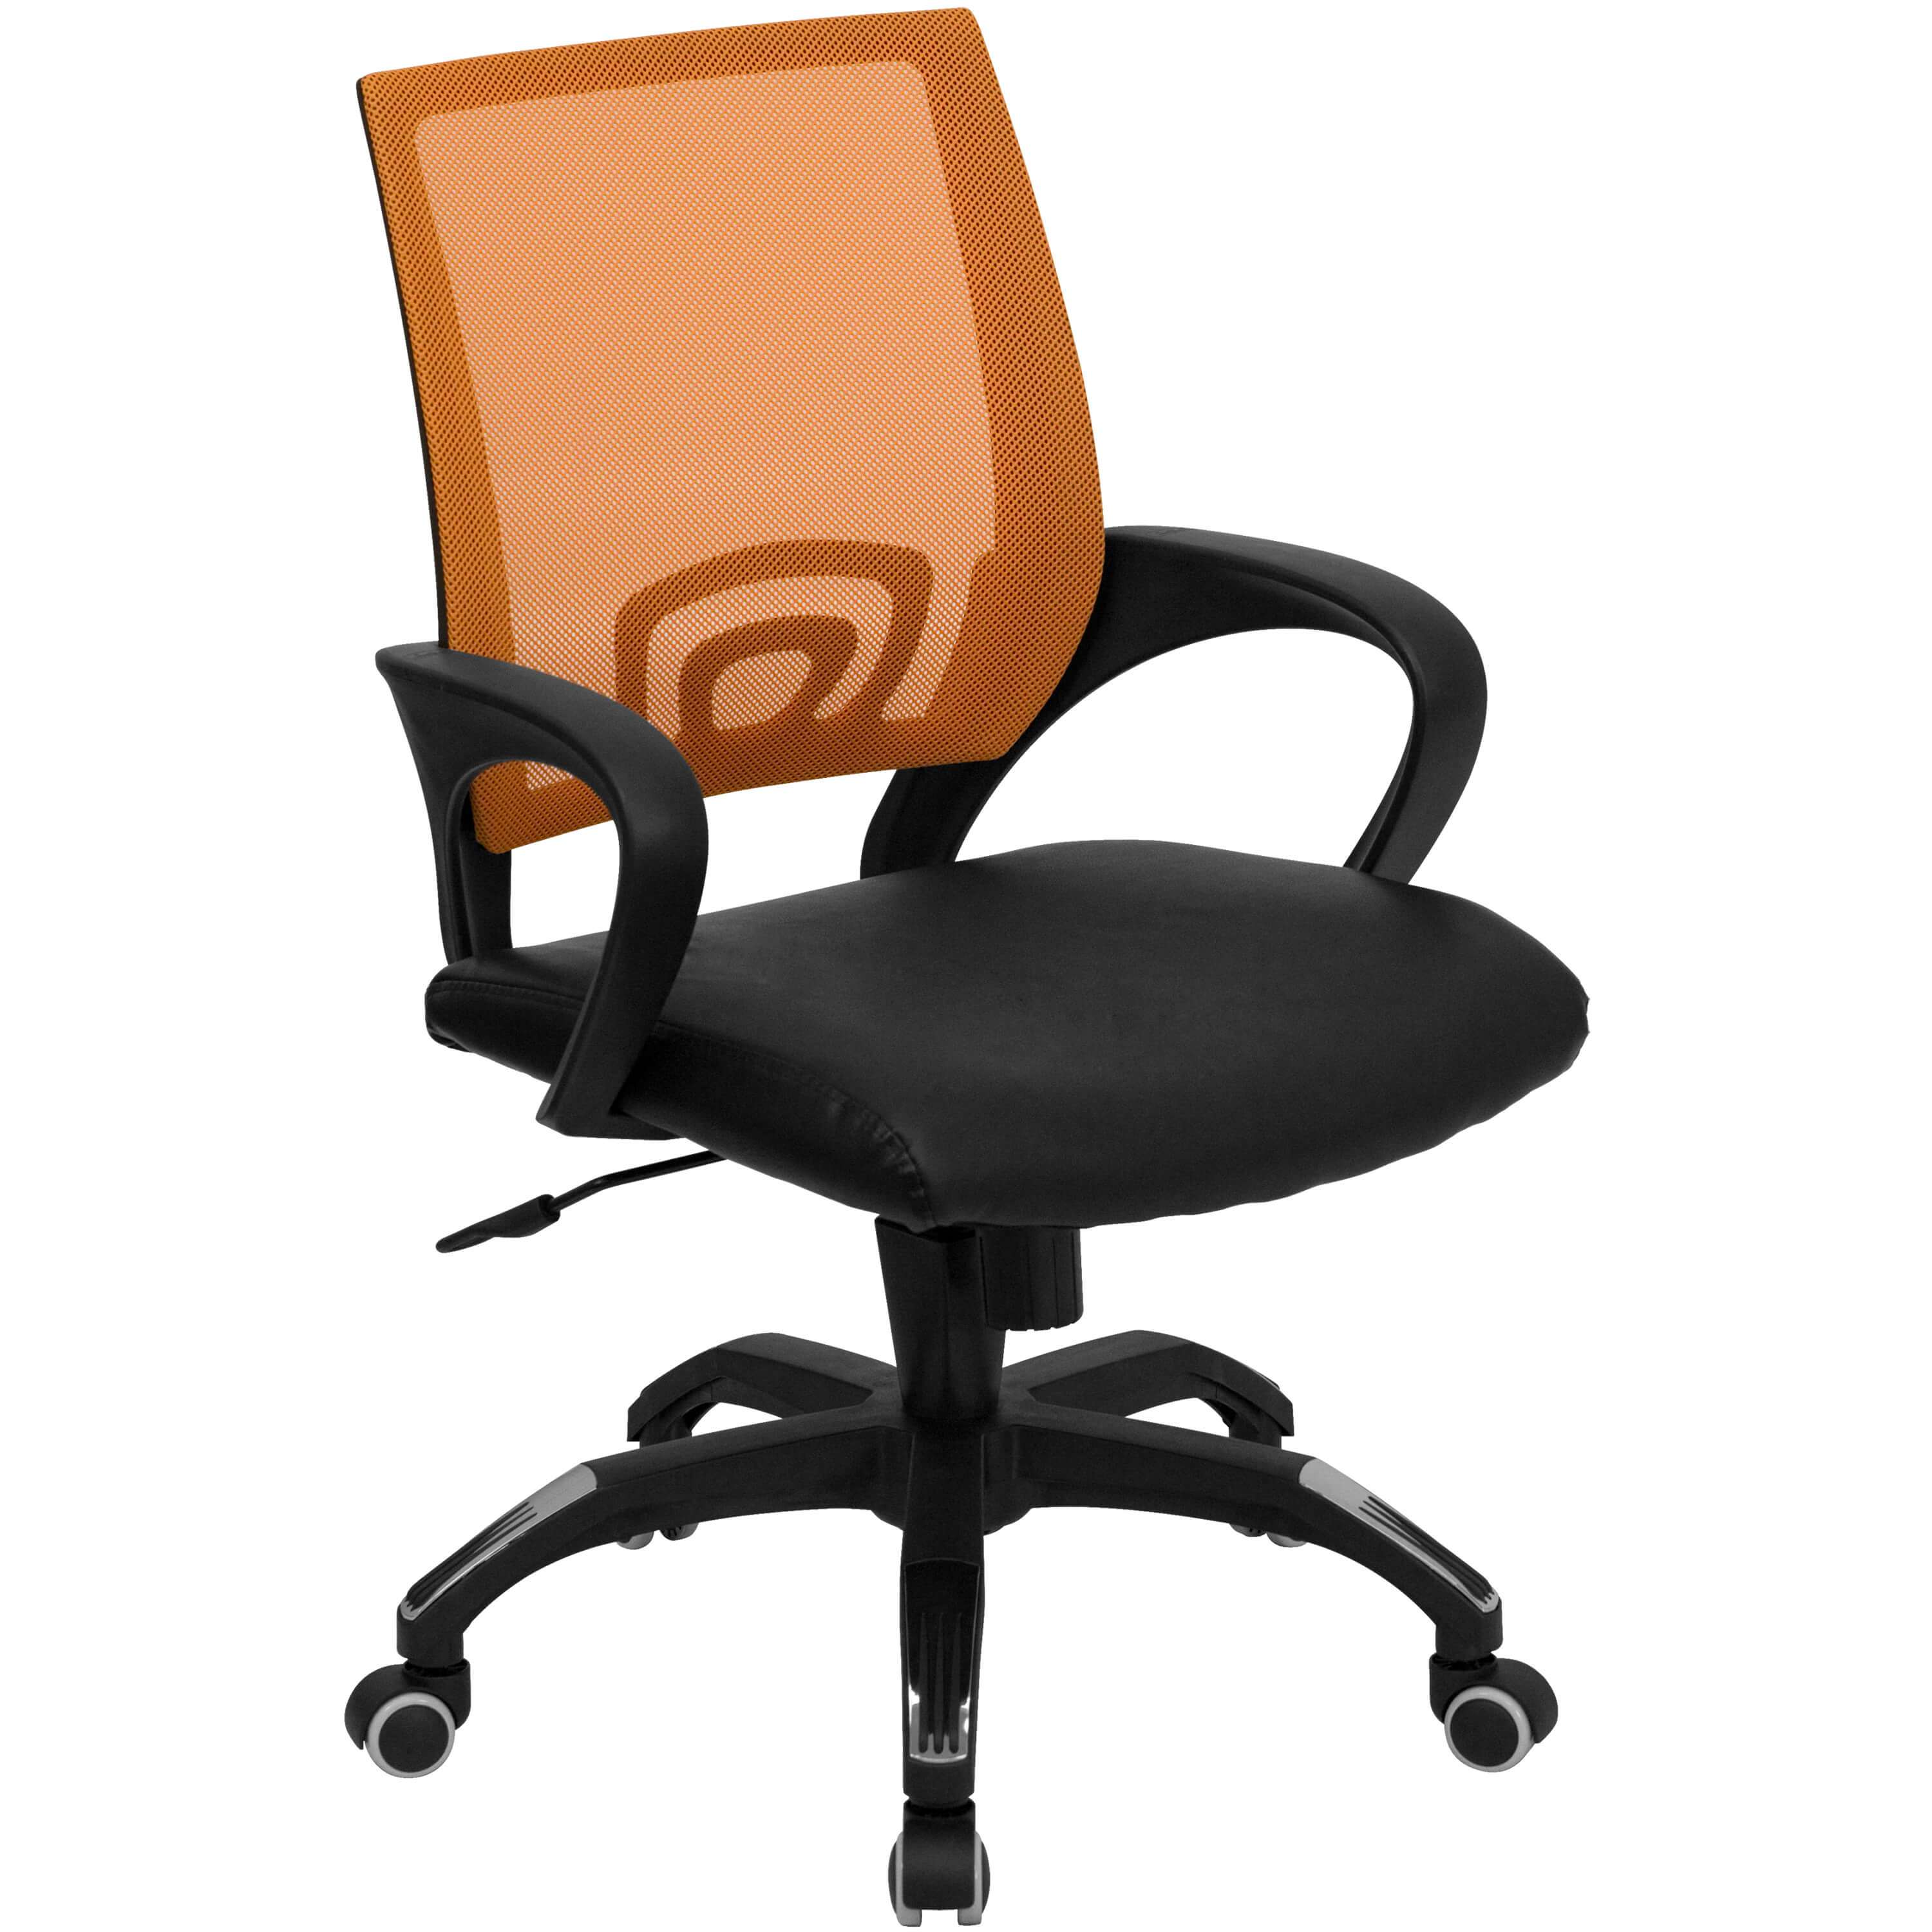 On Style Today 2020 12 14 Cool Office Chair Here